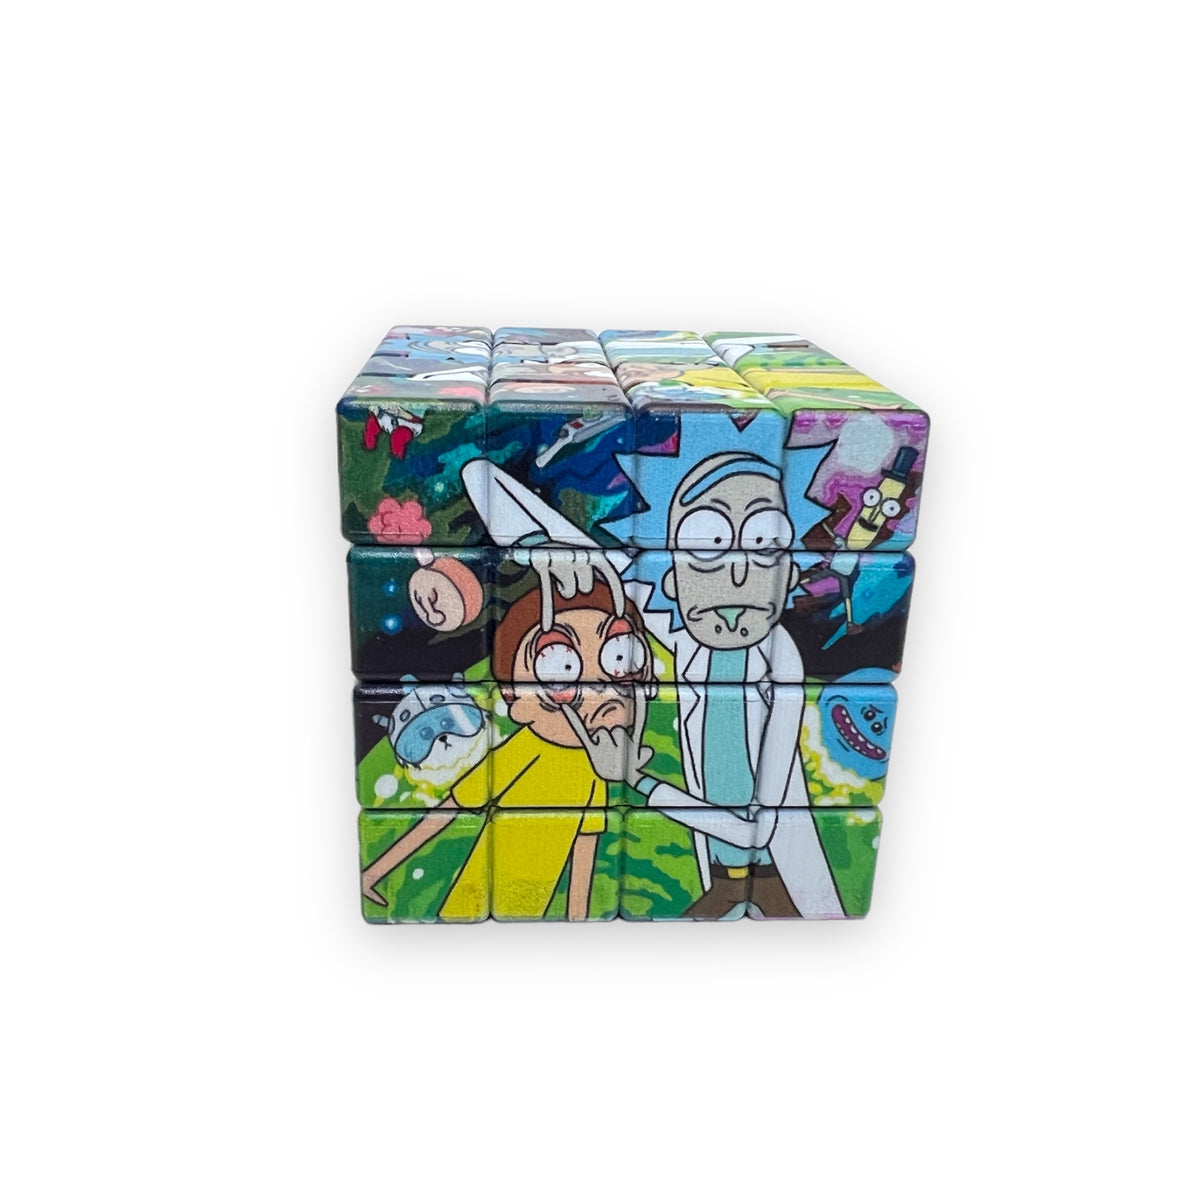 Rick and Morty Rubik's cube Grinder 